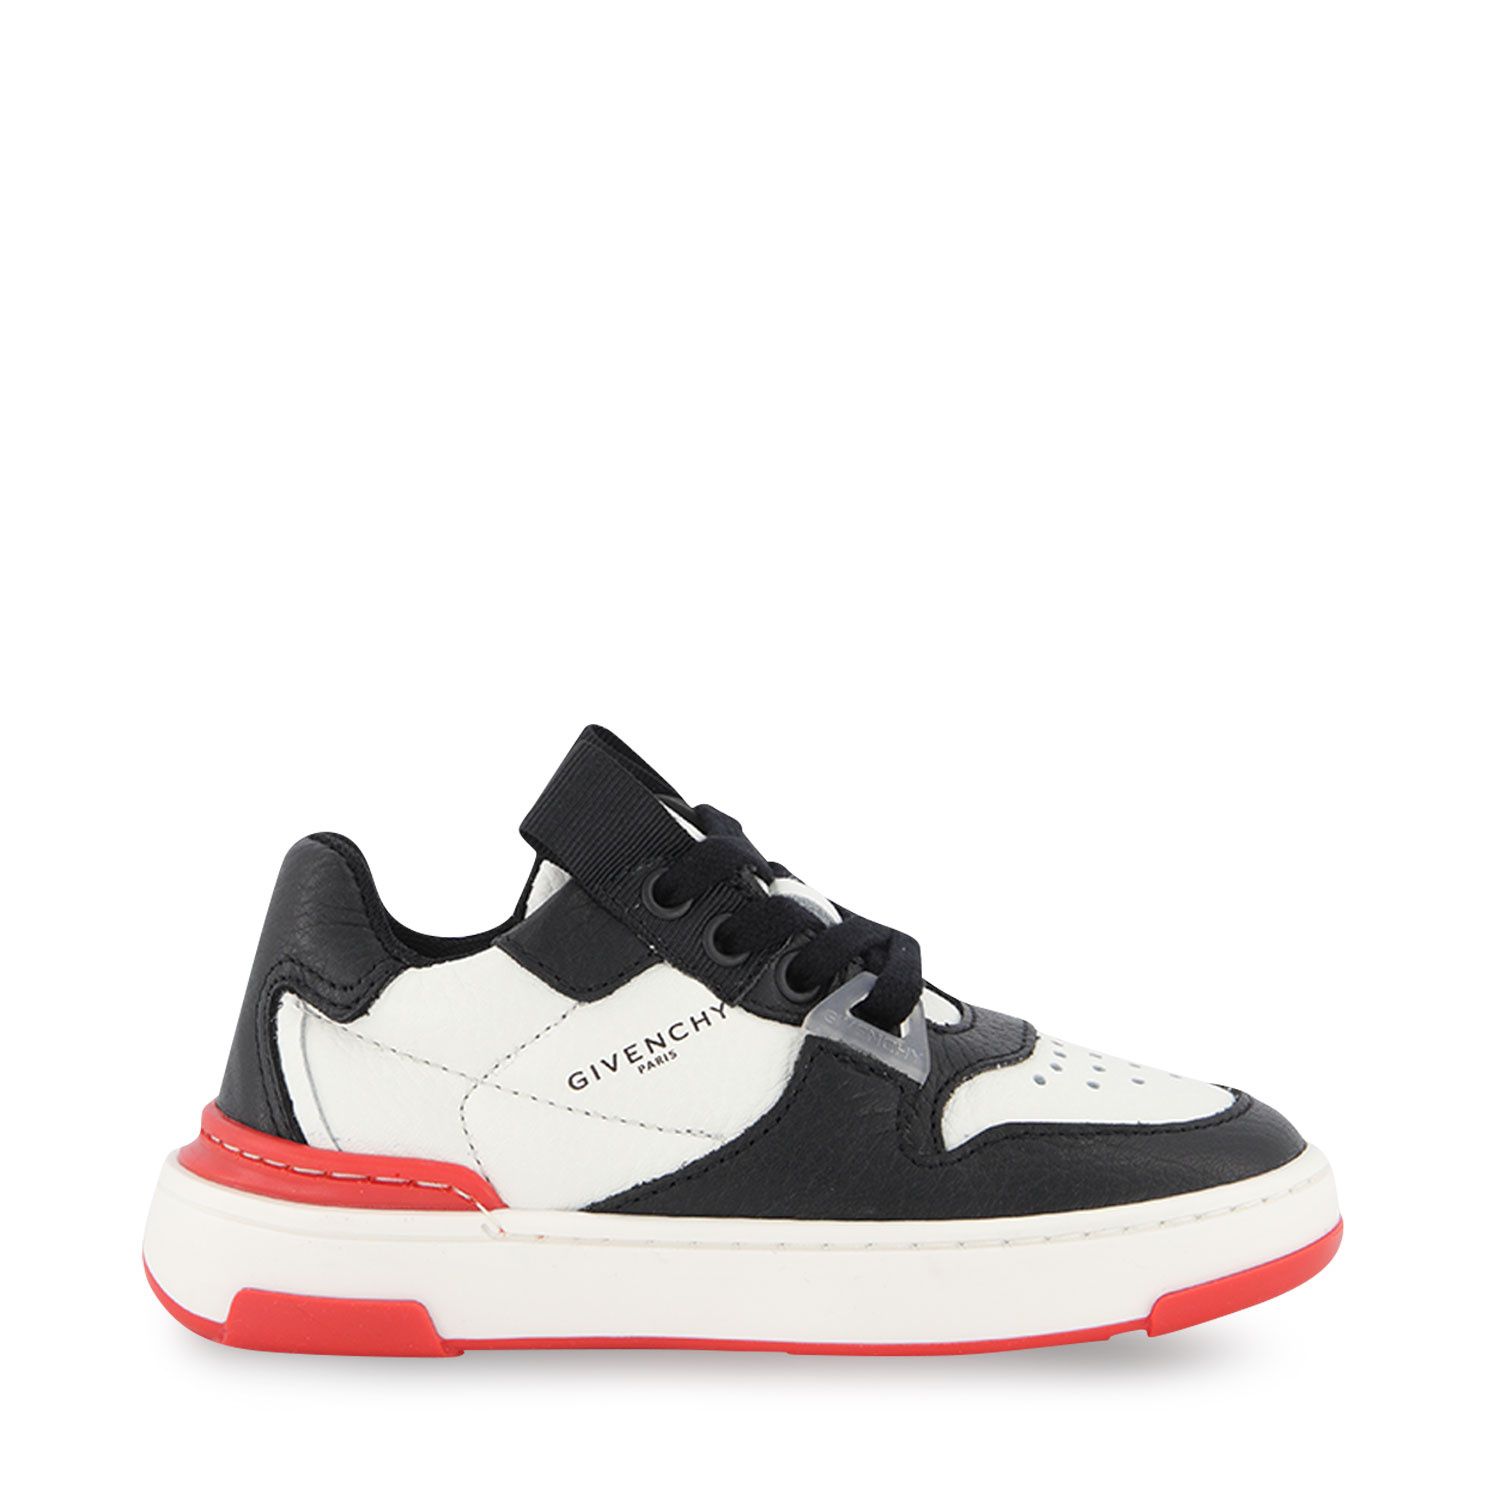 Givenchy H29048 Unisex Junior at Coccinelle